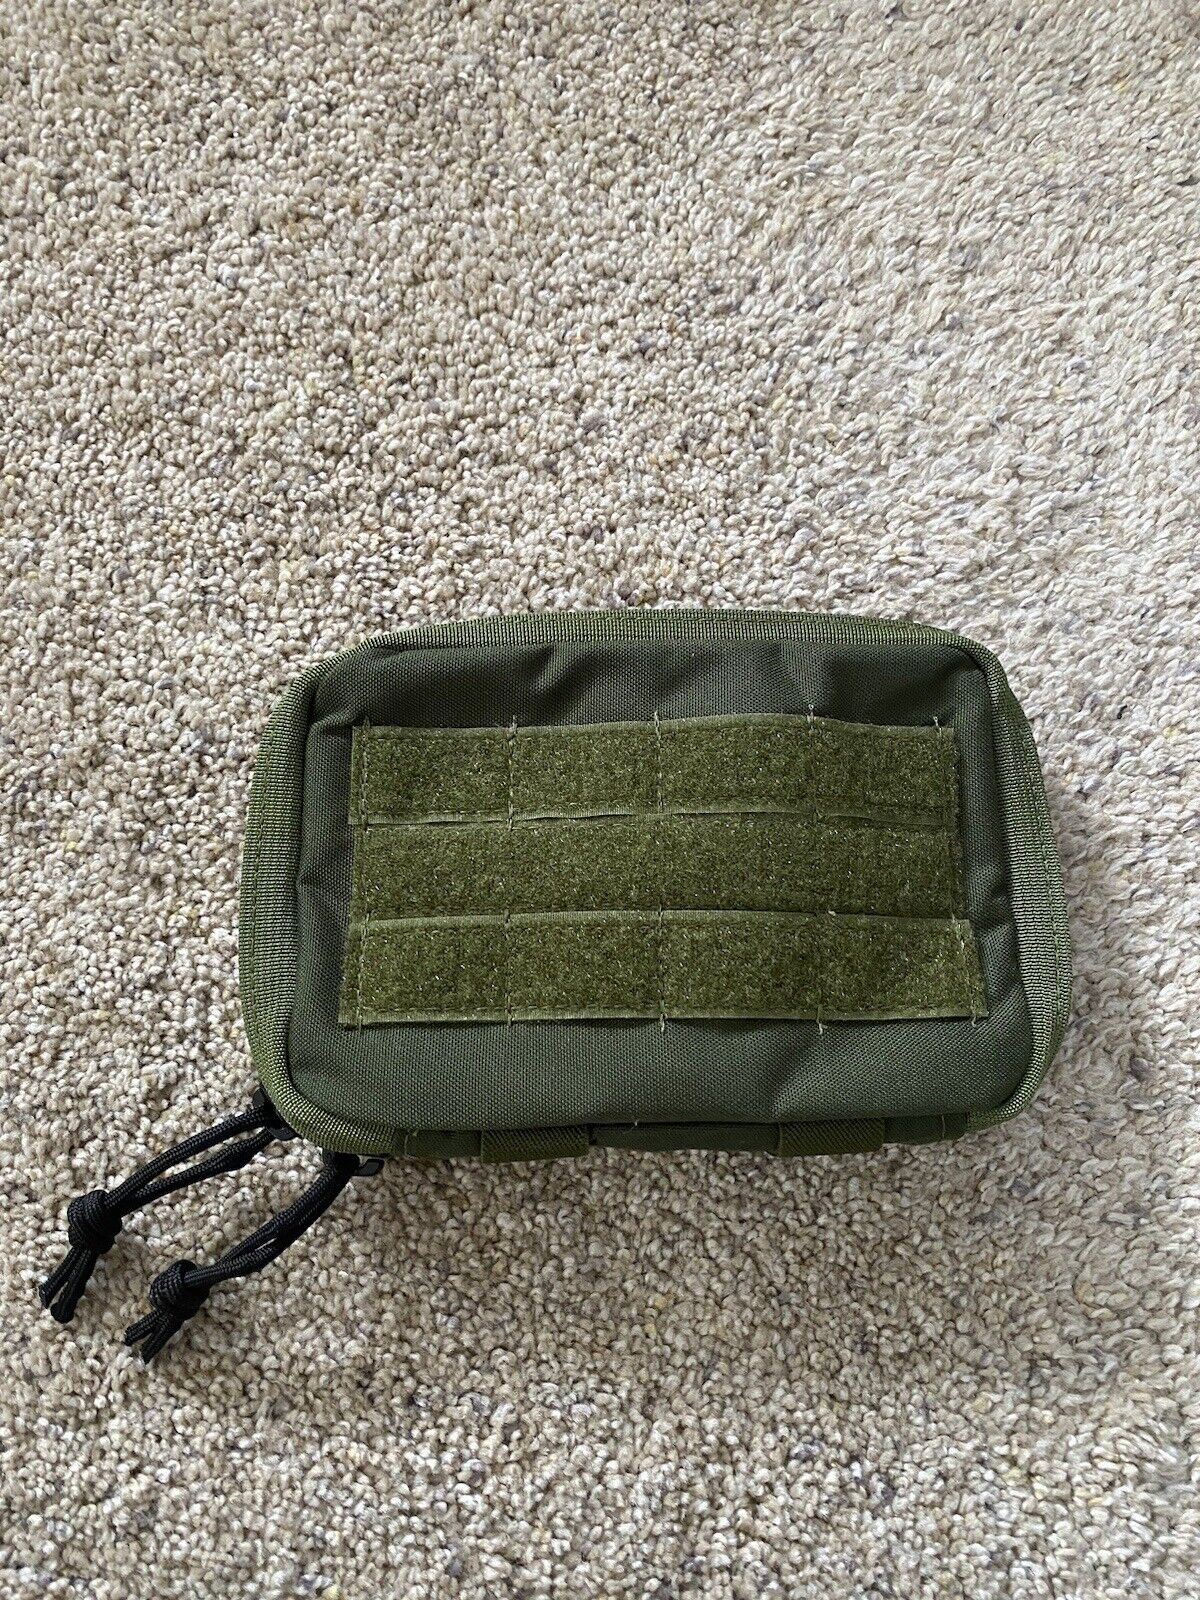 Tactical Tailor Fight Light Enhanced Admin Pouch OD Green Tactical Military